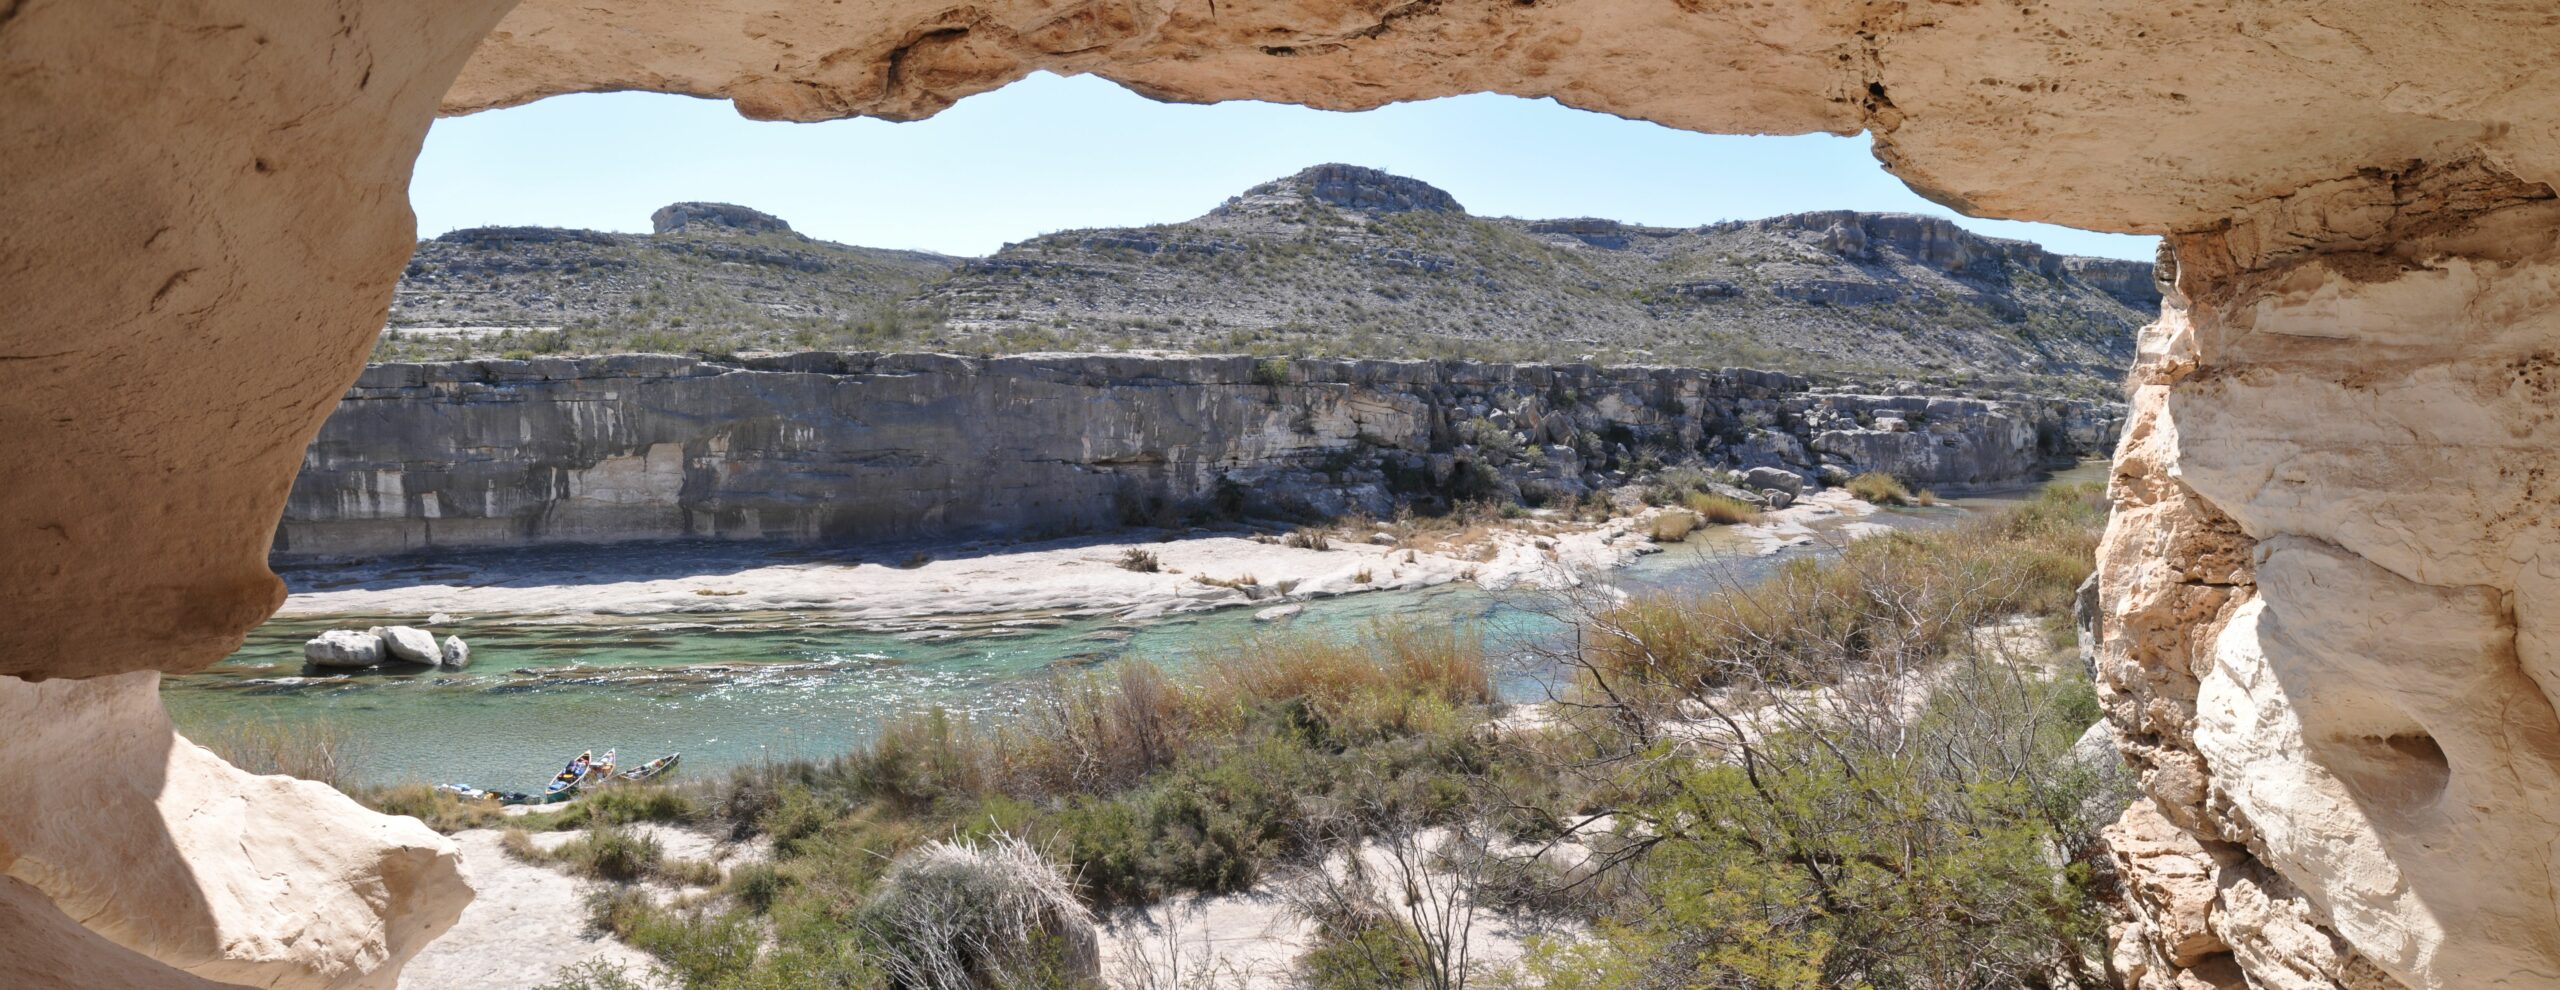 A Journey Through the Canyons of the Lower Pecos River by Kayak